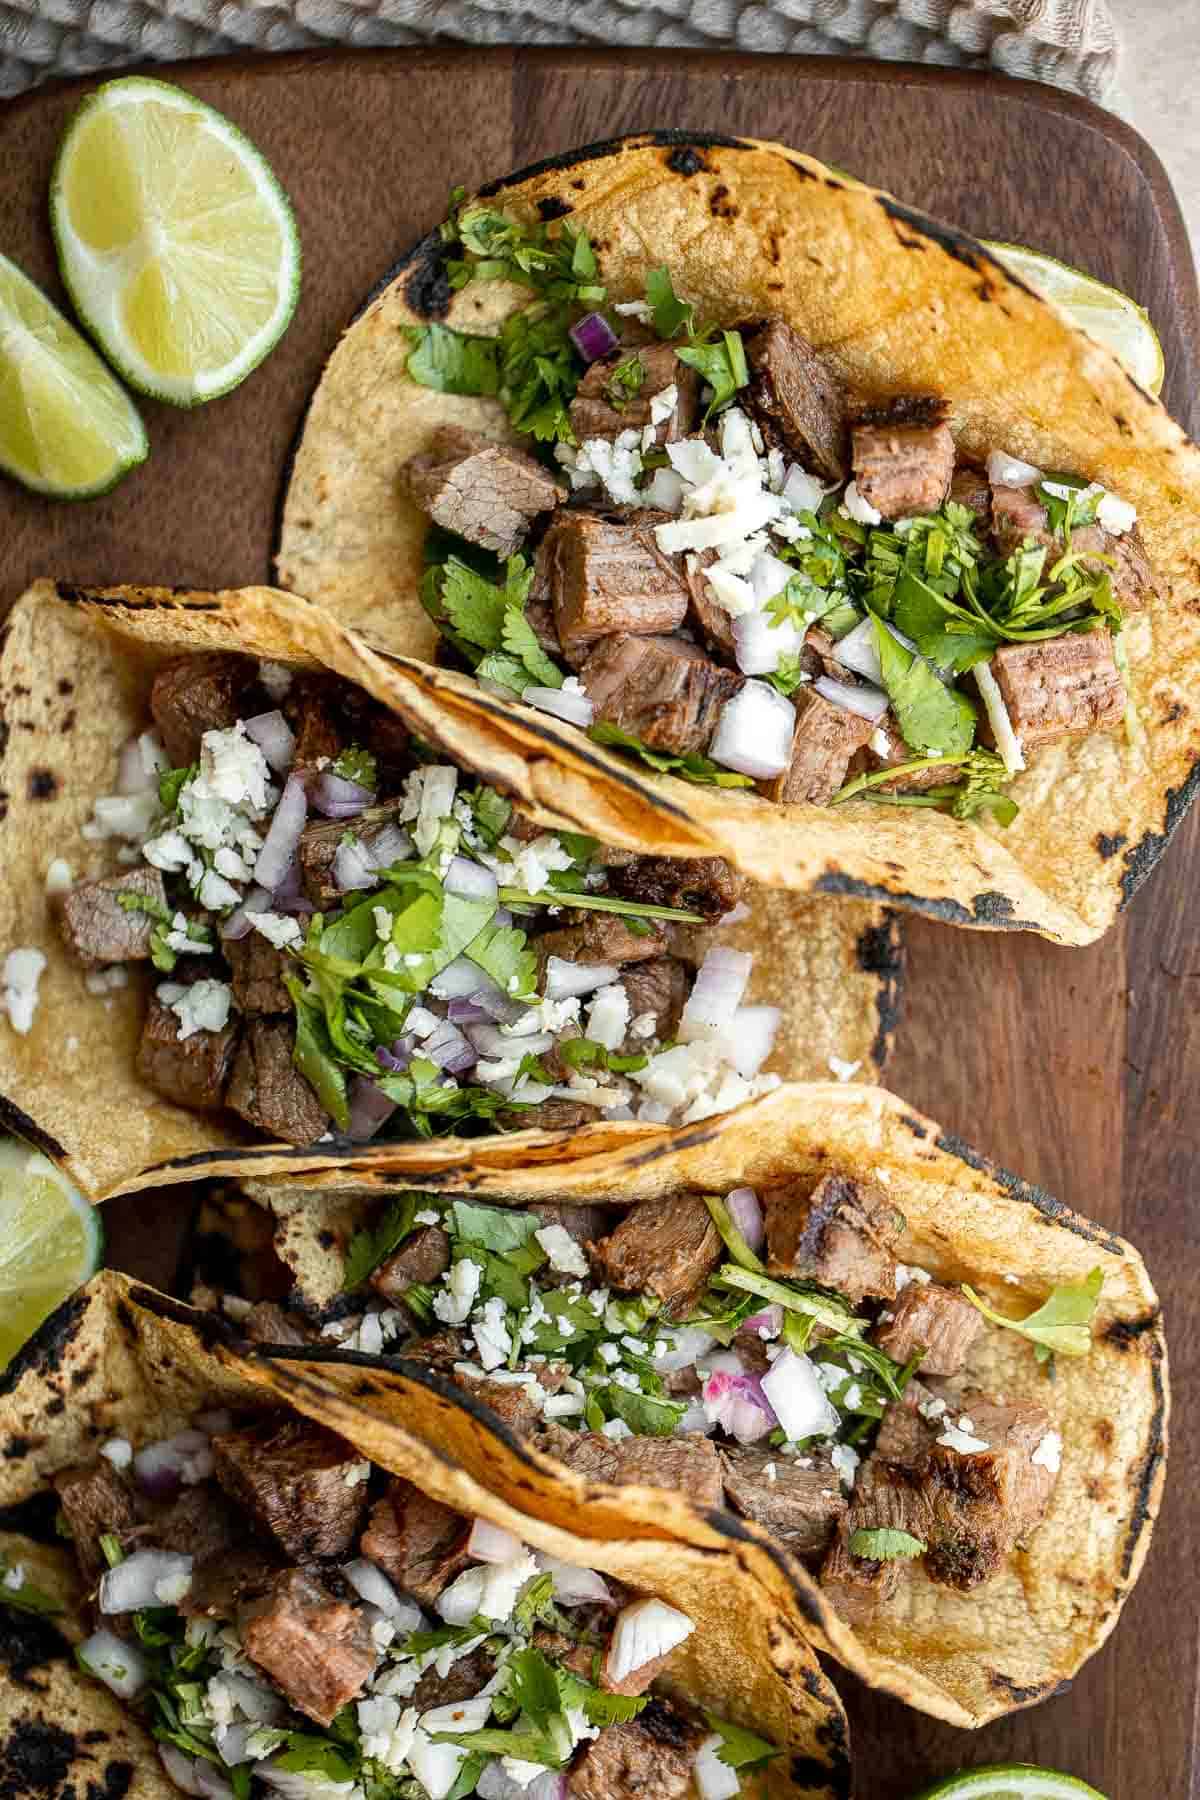 Carne asada tacos are delicious, juicy, and tender Mexican street tacos loaded with steak bites that everyone will be raving about on Taco Tuesday! | aheadofthyme.com